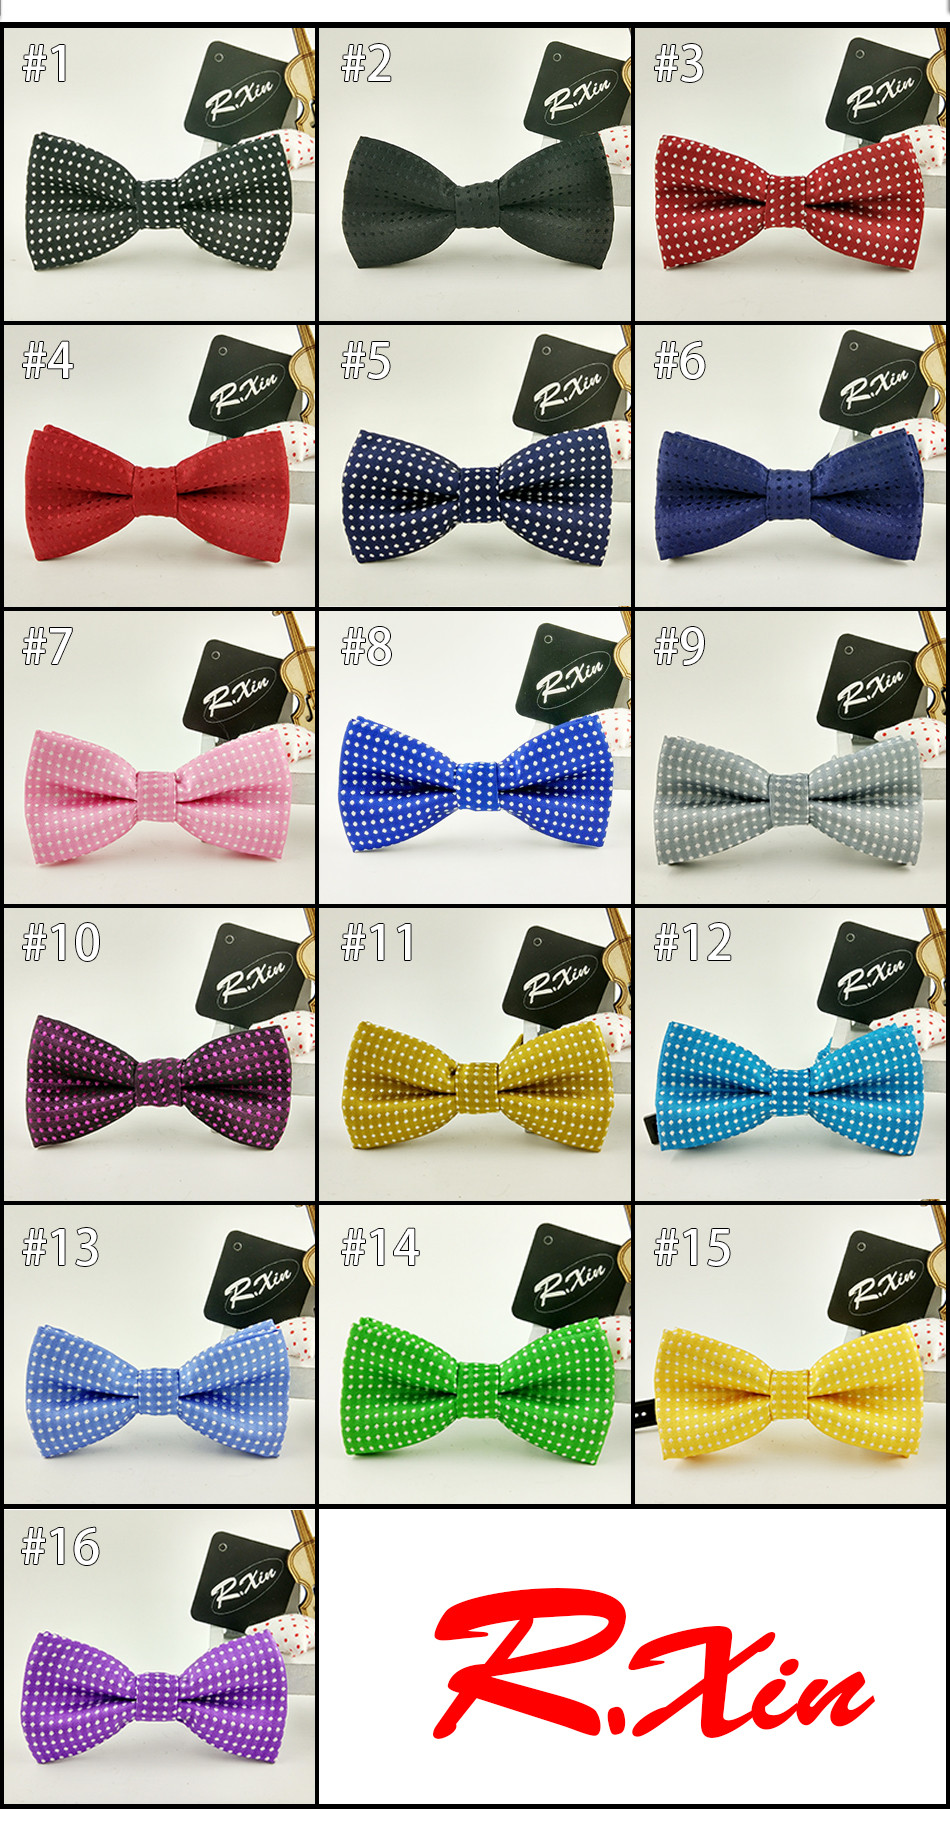 Children-New-Fashion-Formal-Cotton--Kid-Classical--Bowties-Butterfly-Wedding-Party-Pet-Bowtie-Tuxedo-32619244738